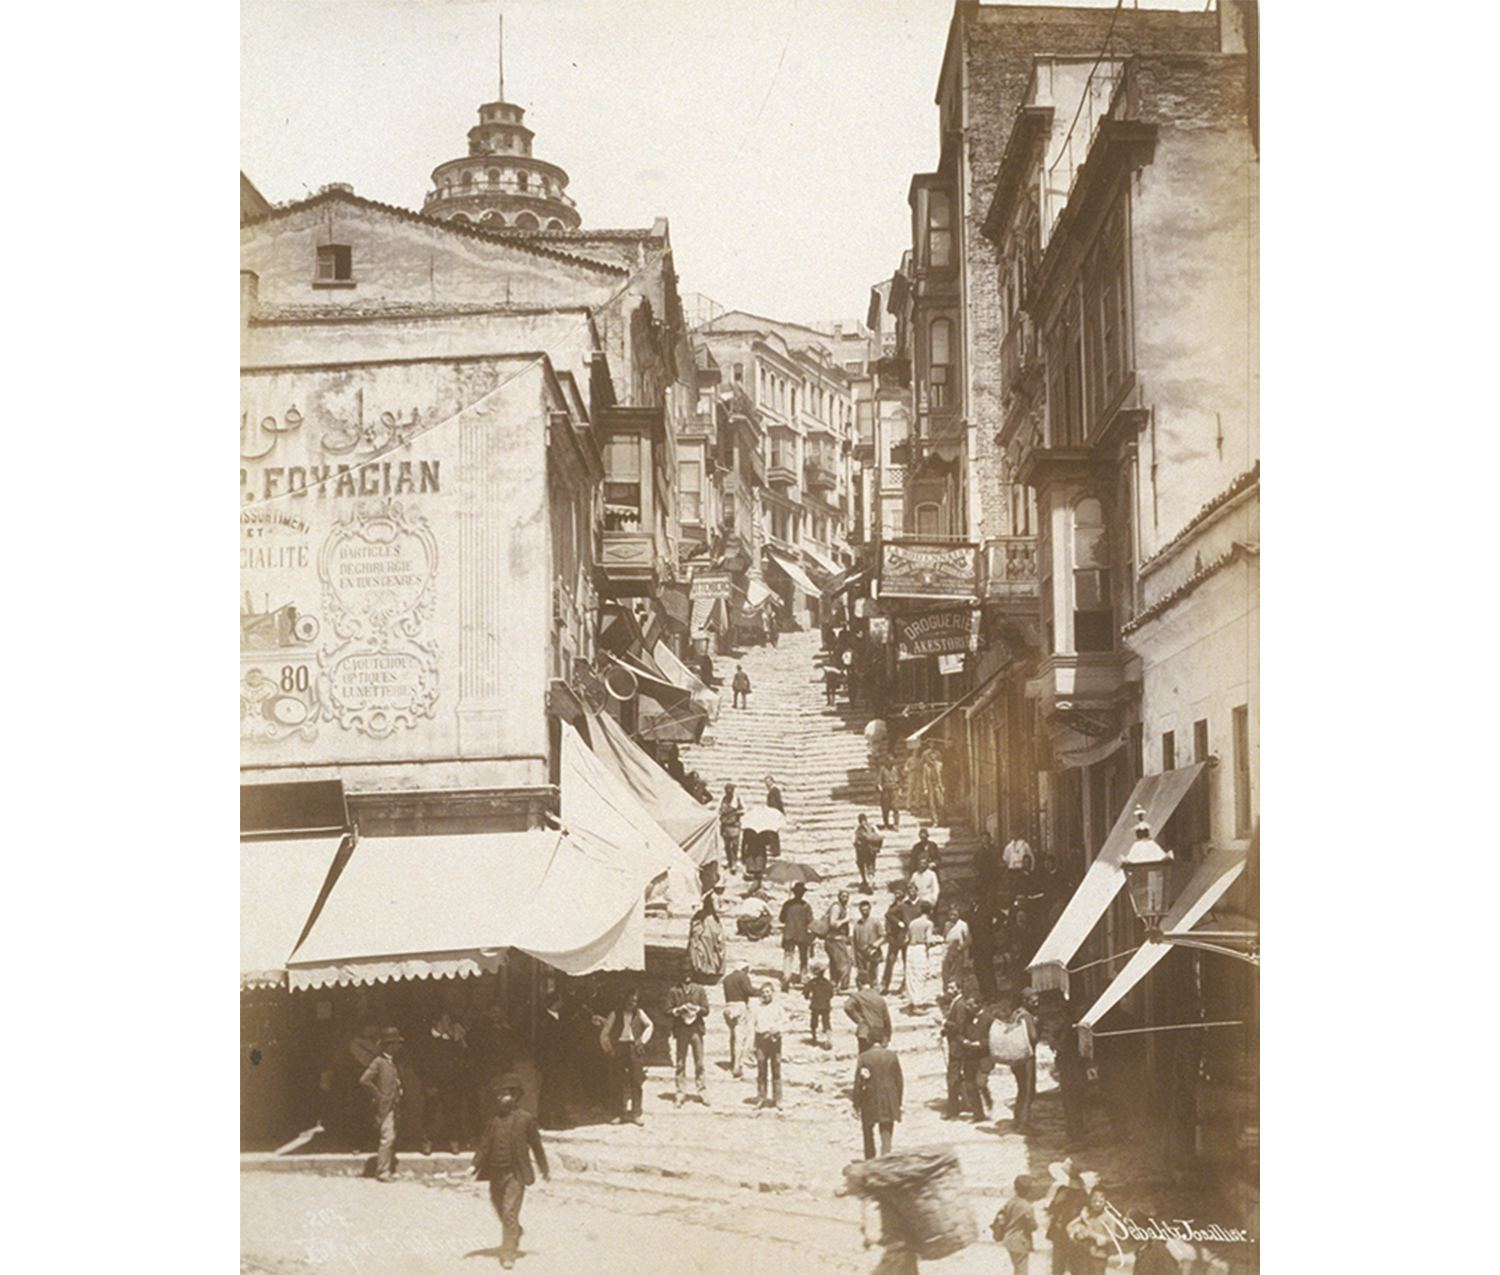 Image of Karaköy region of Istanbul. Galata tower in the background; street scenes with stores and people walking